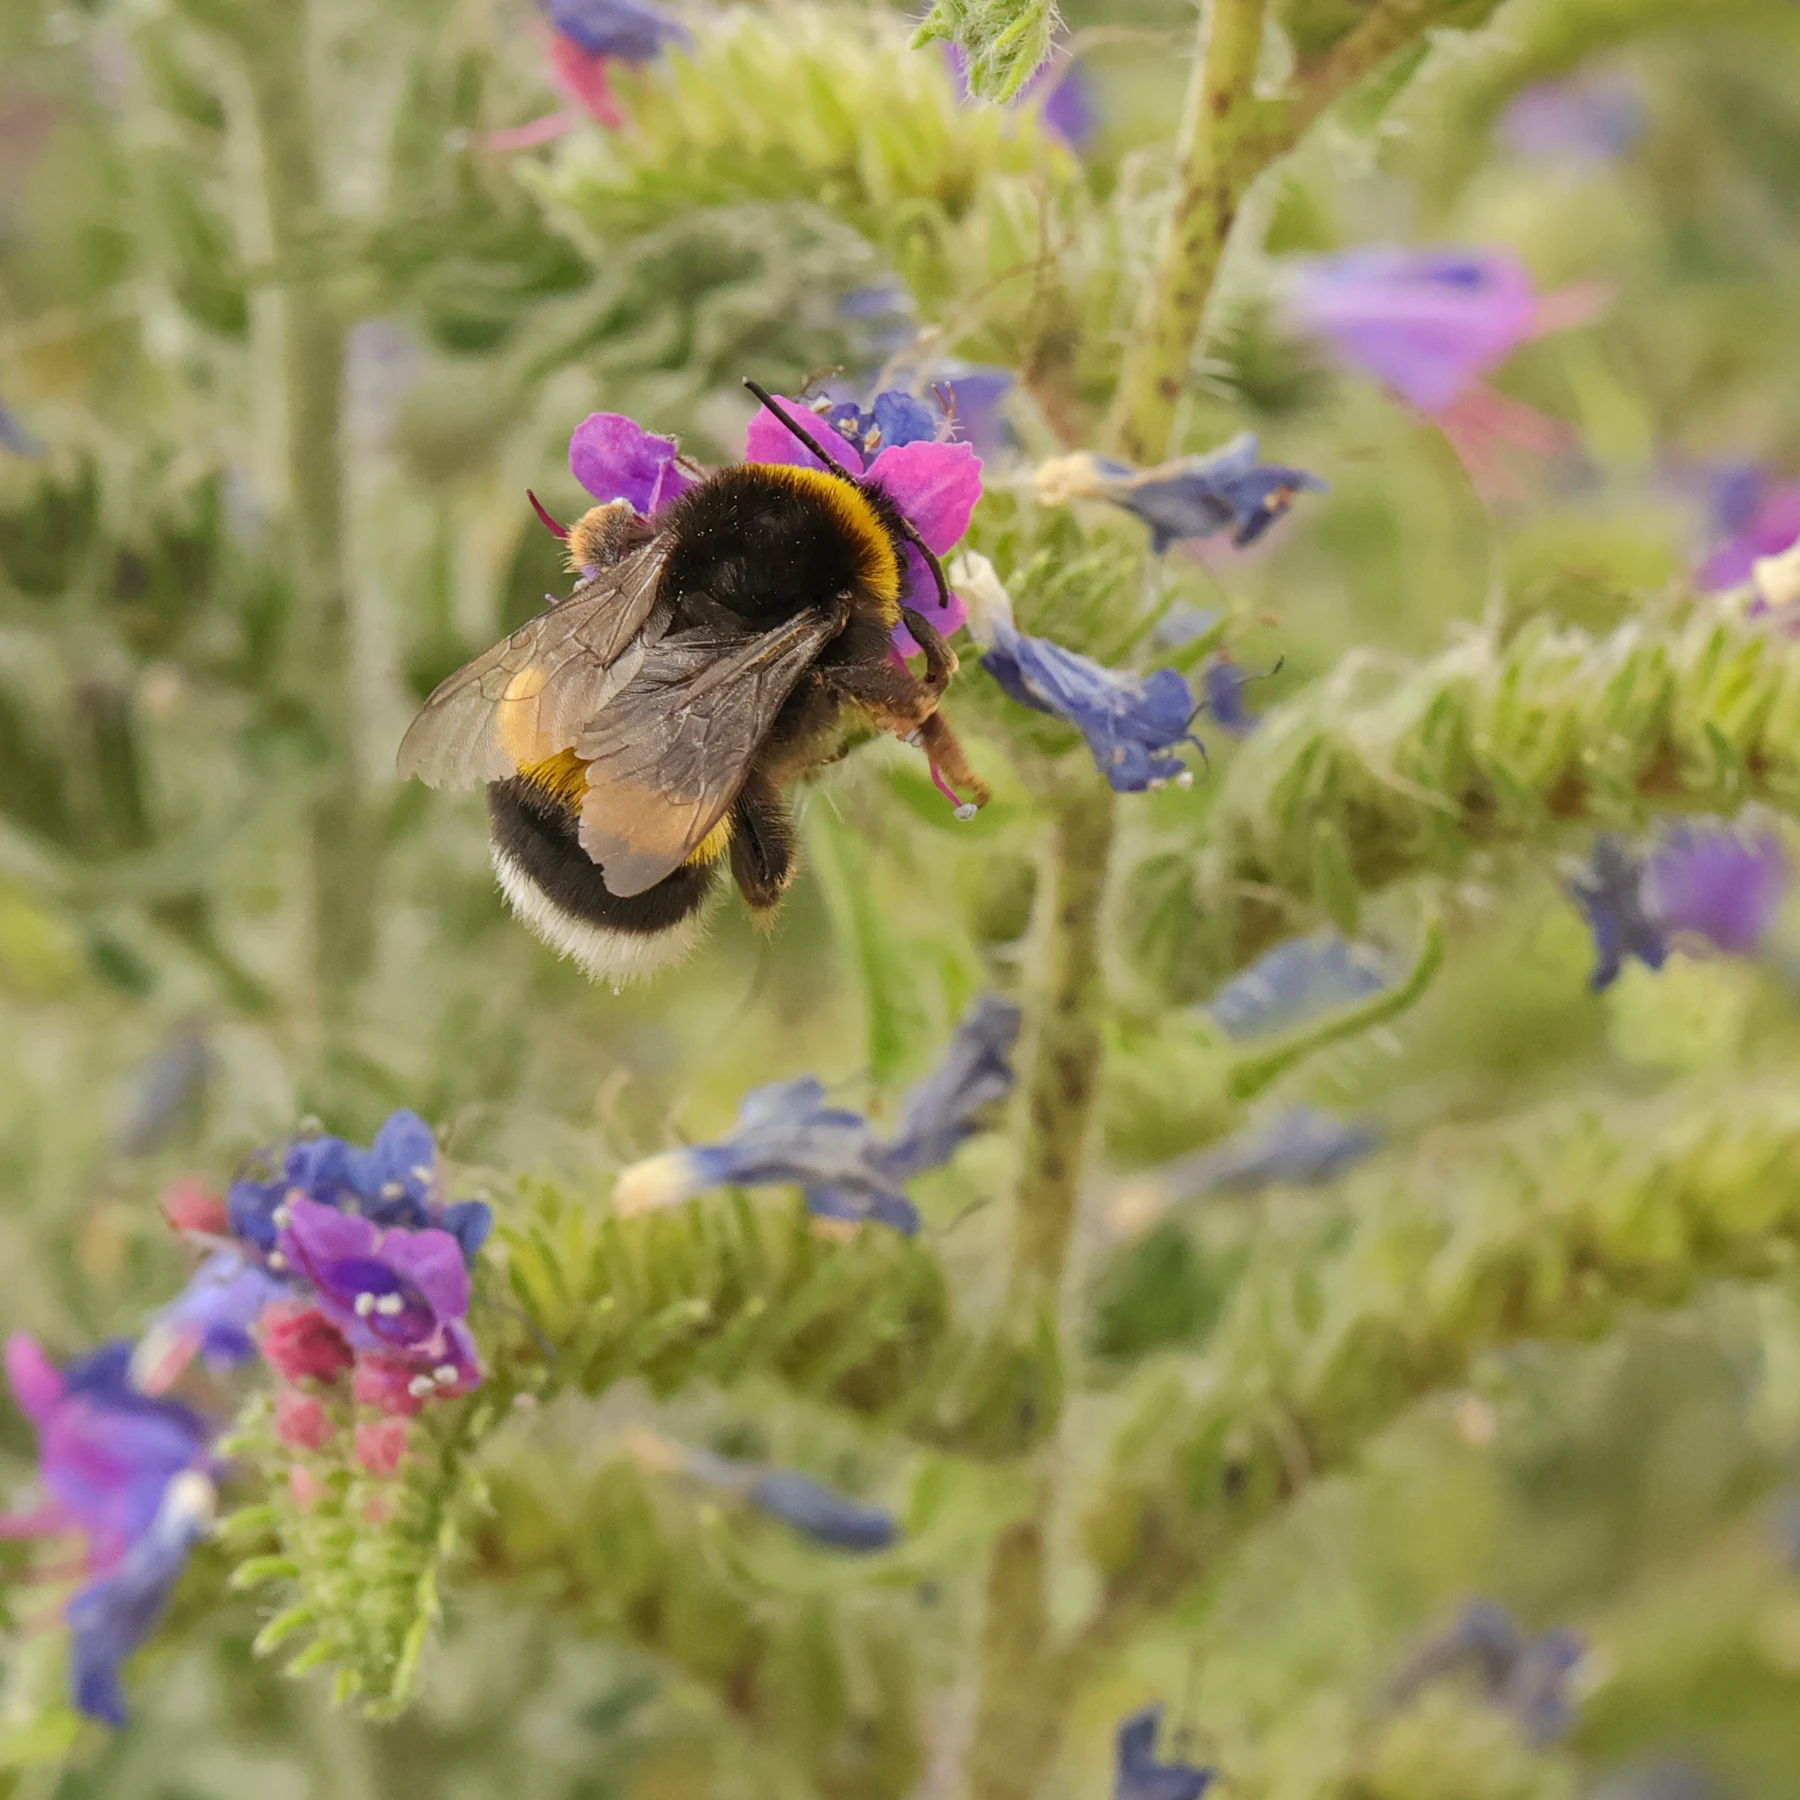 A bumblebee pollinates the flowers of viper's bugloss